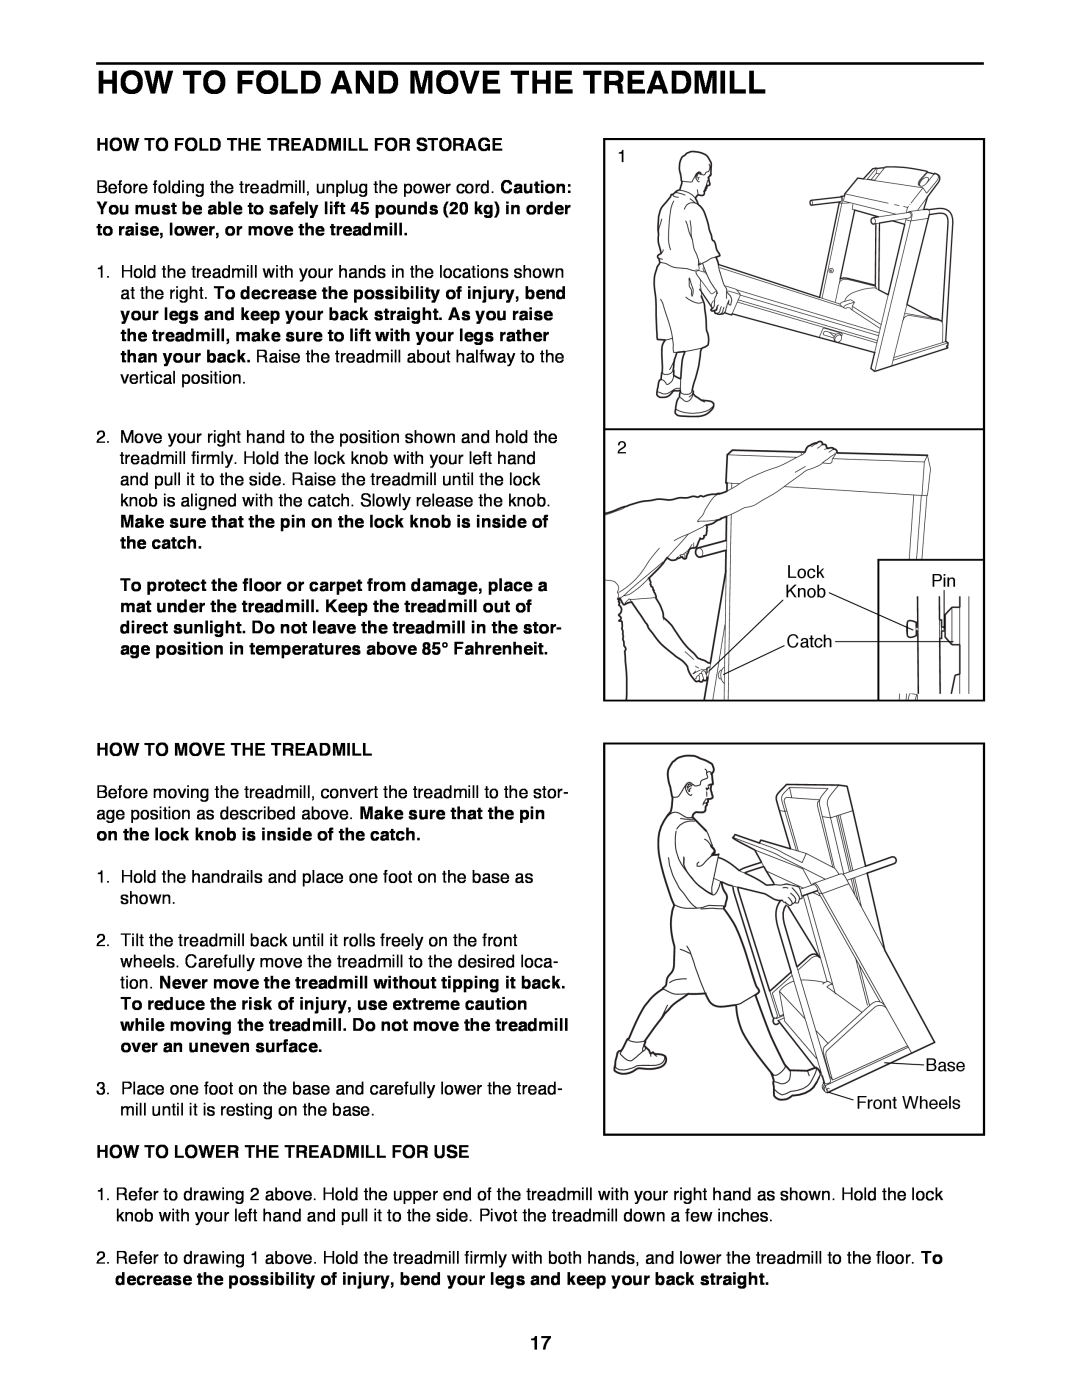 Image 831.297572 How To Fold And Move The Treadmill, How To Fold The Treadmill For Storage, How To Move The Treadmill 